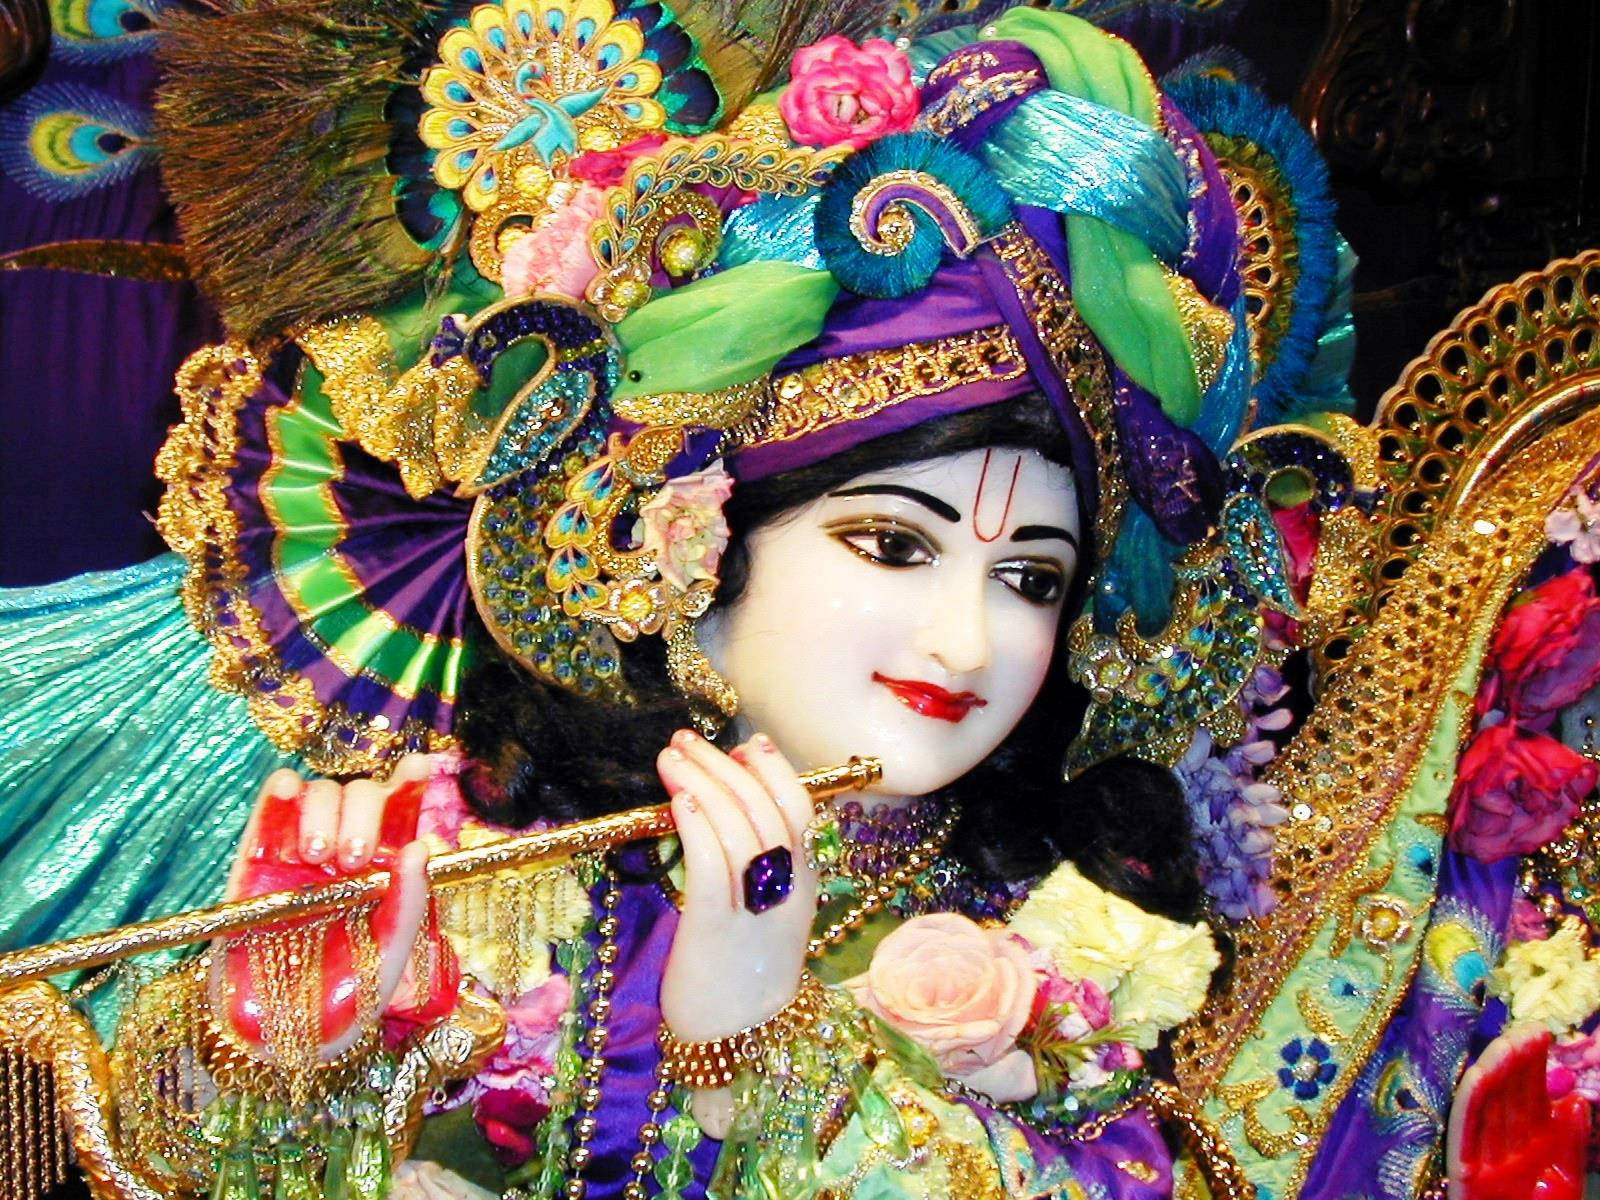 Krishna Bhagwan Statue With Colorful Clothes